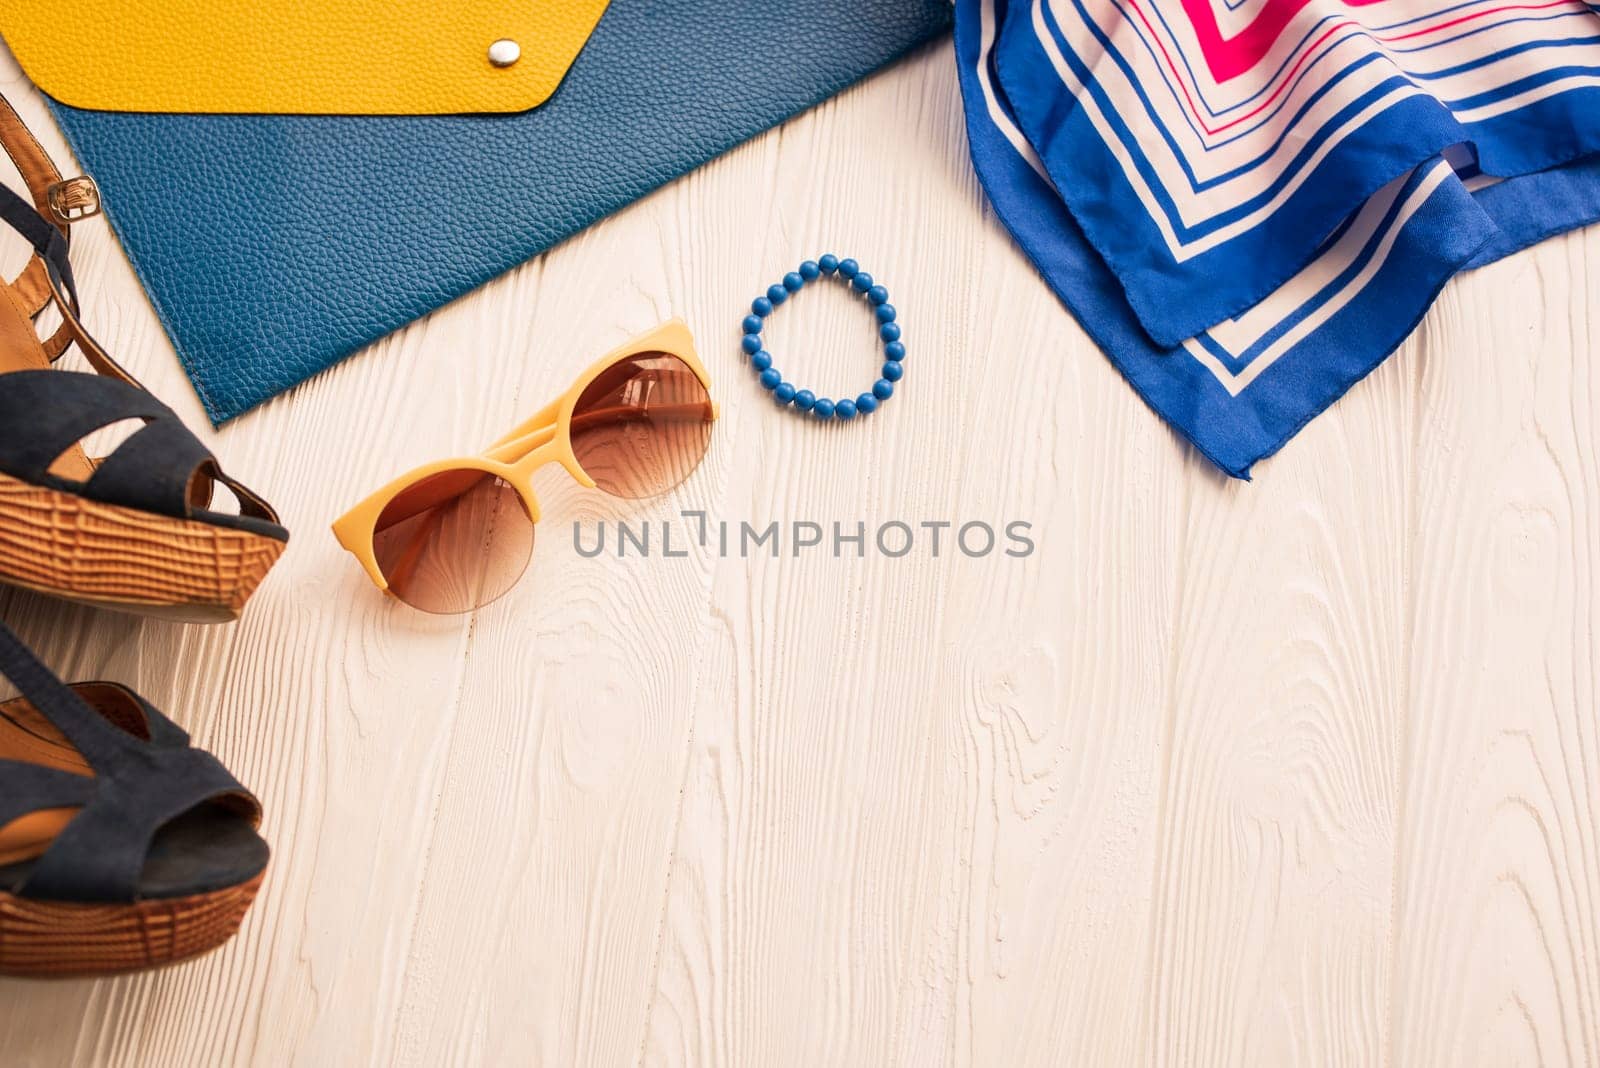 Sunglasses bijouterie jewelry bracelets clutch bag wedges shoes. Summer background mockup. top view above white wooden background Summer fashion accessories beach. Women summer design Vacation concept